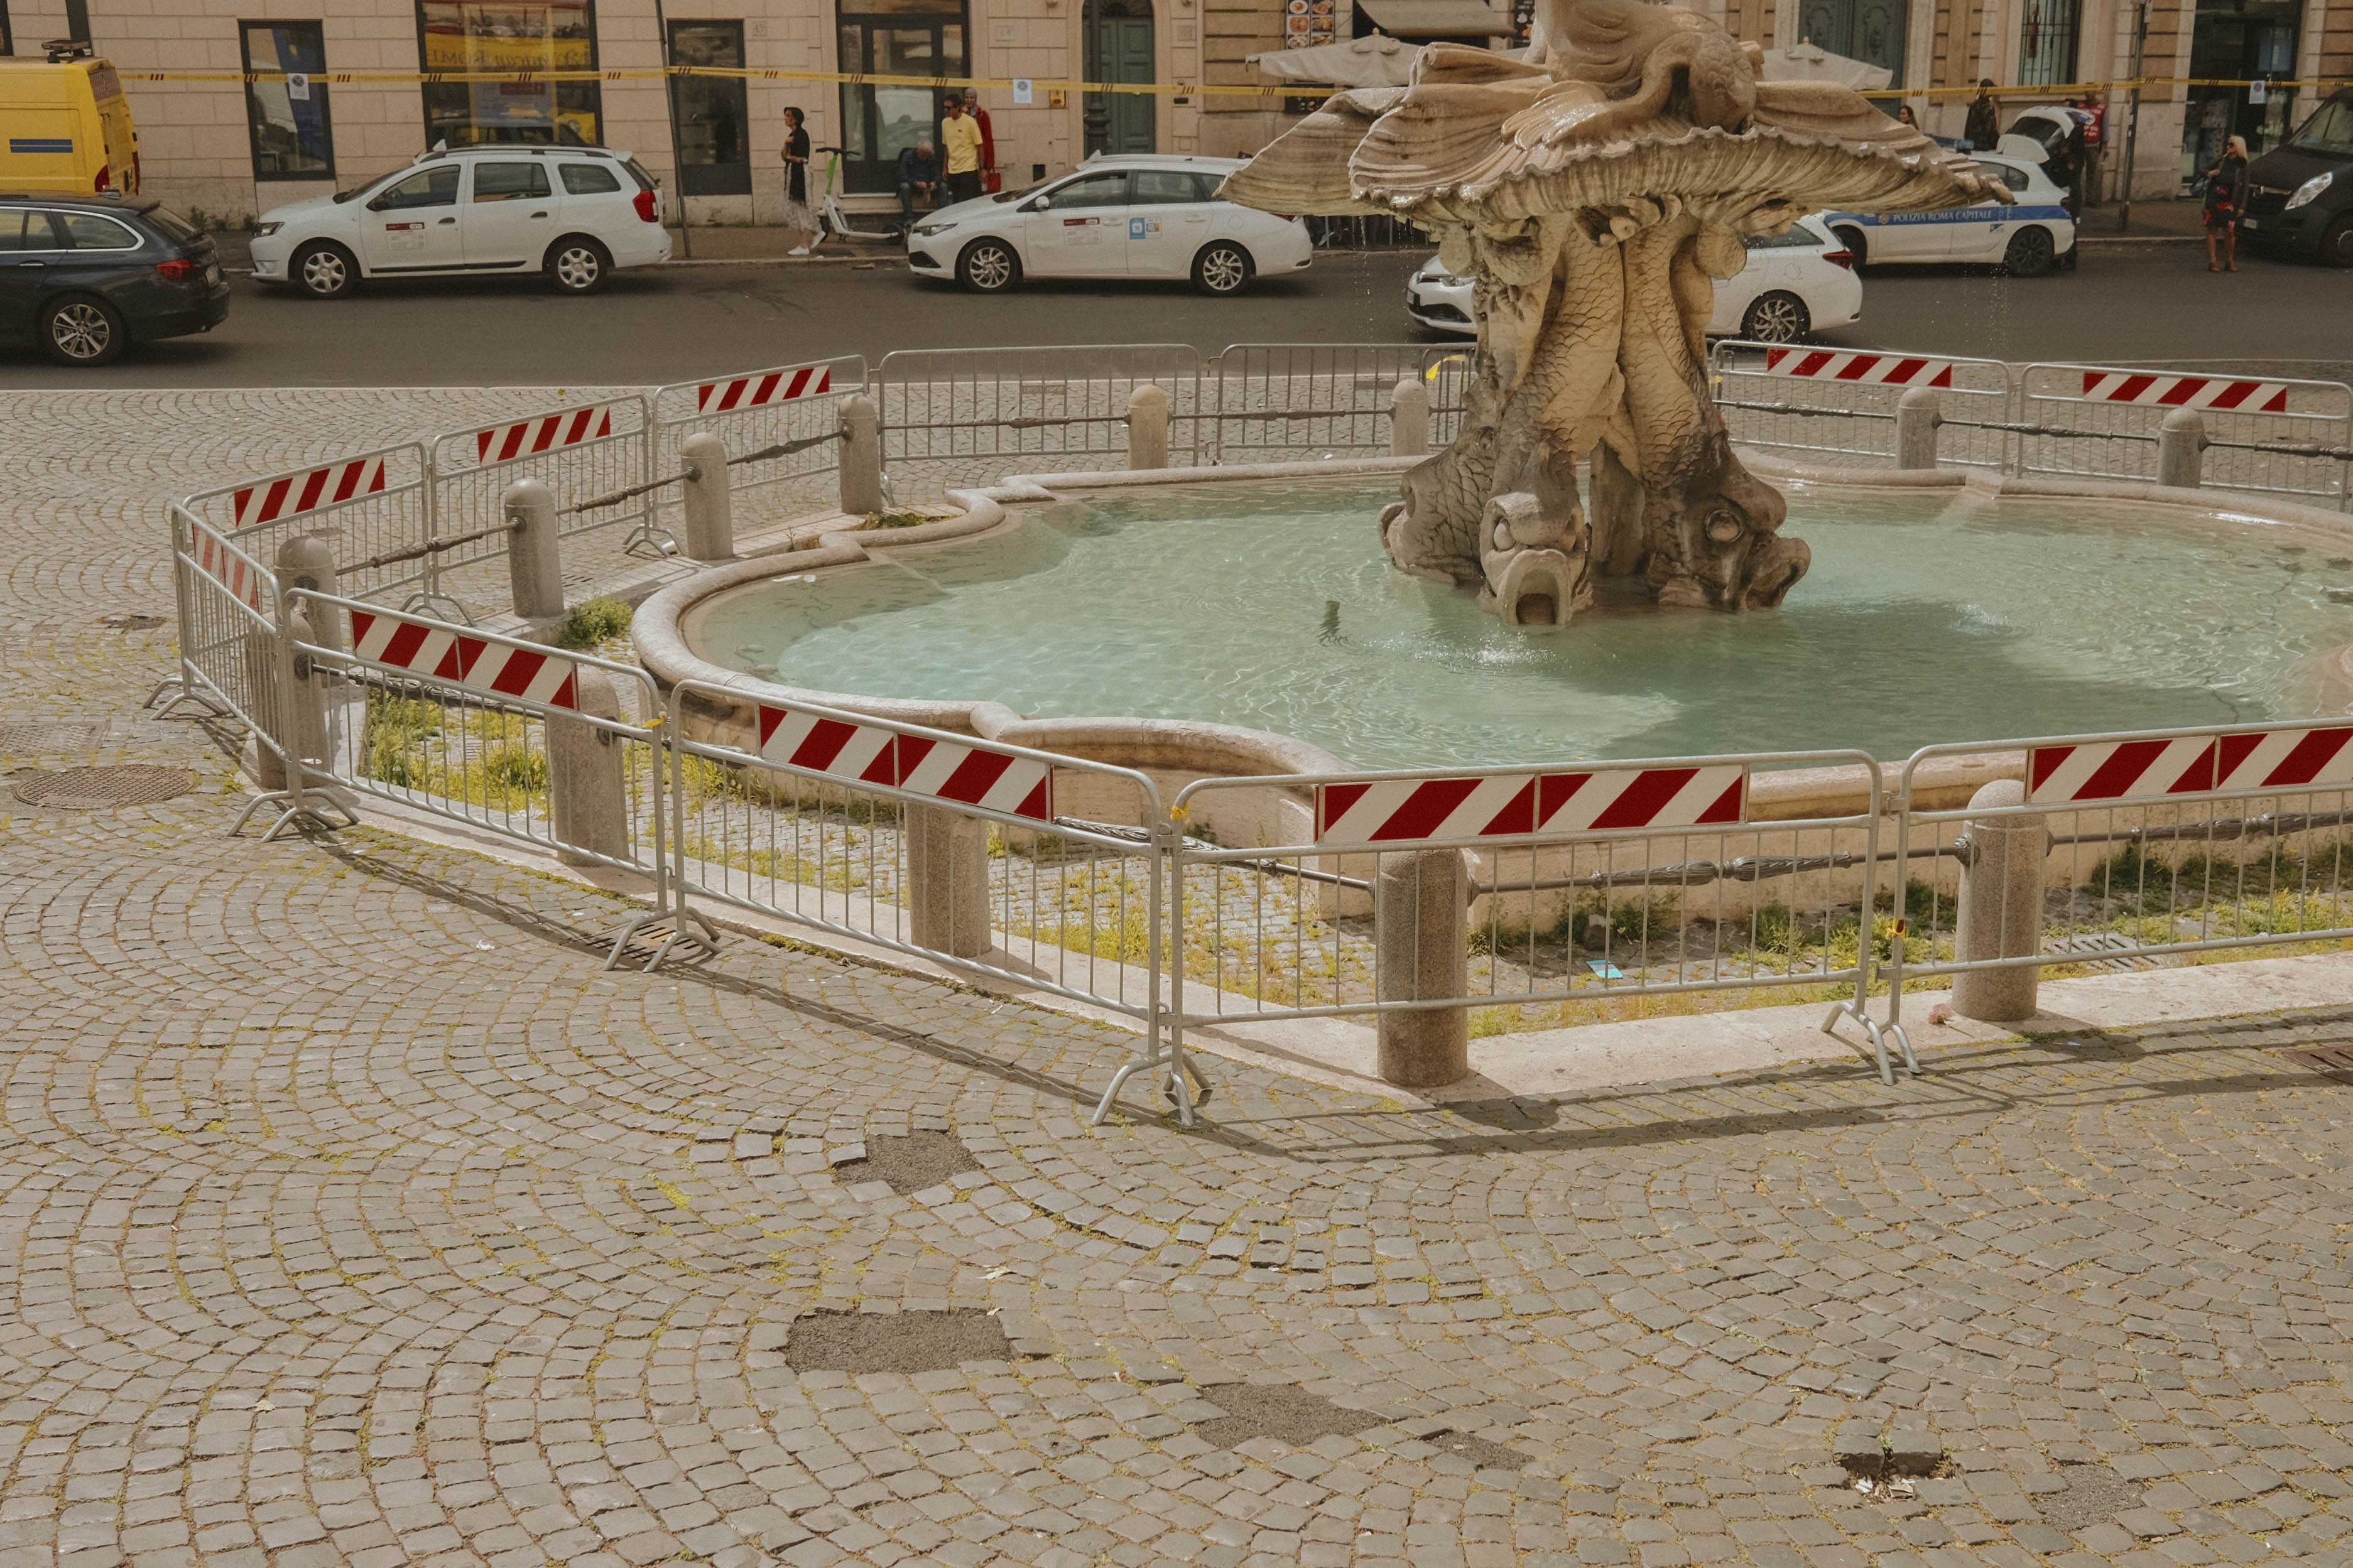 Fountain, closed to off due to renovation work